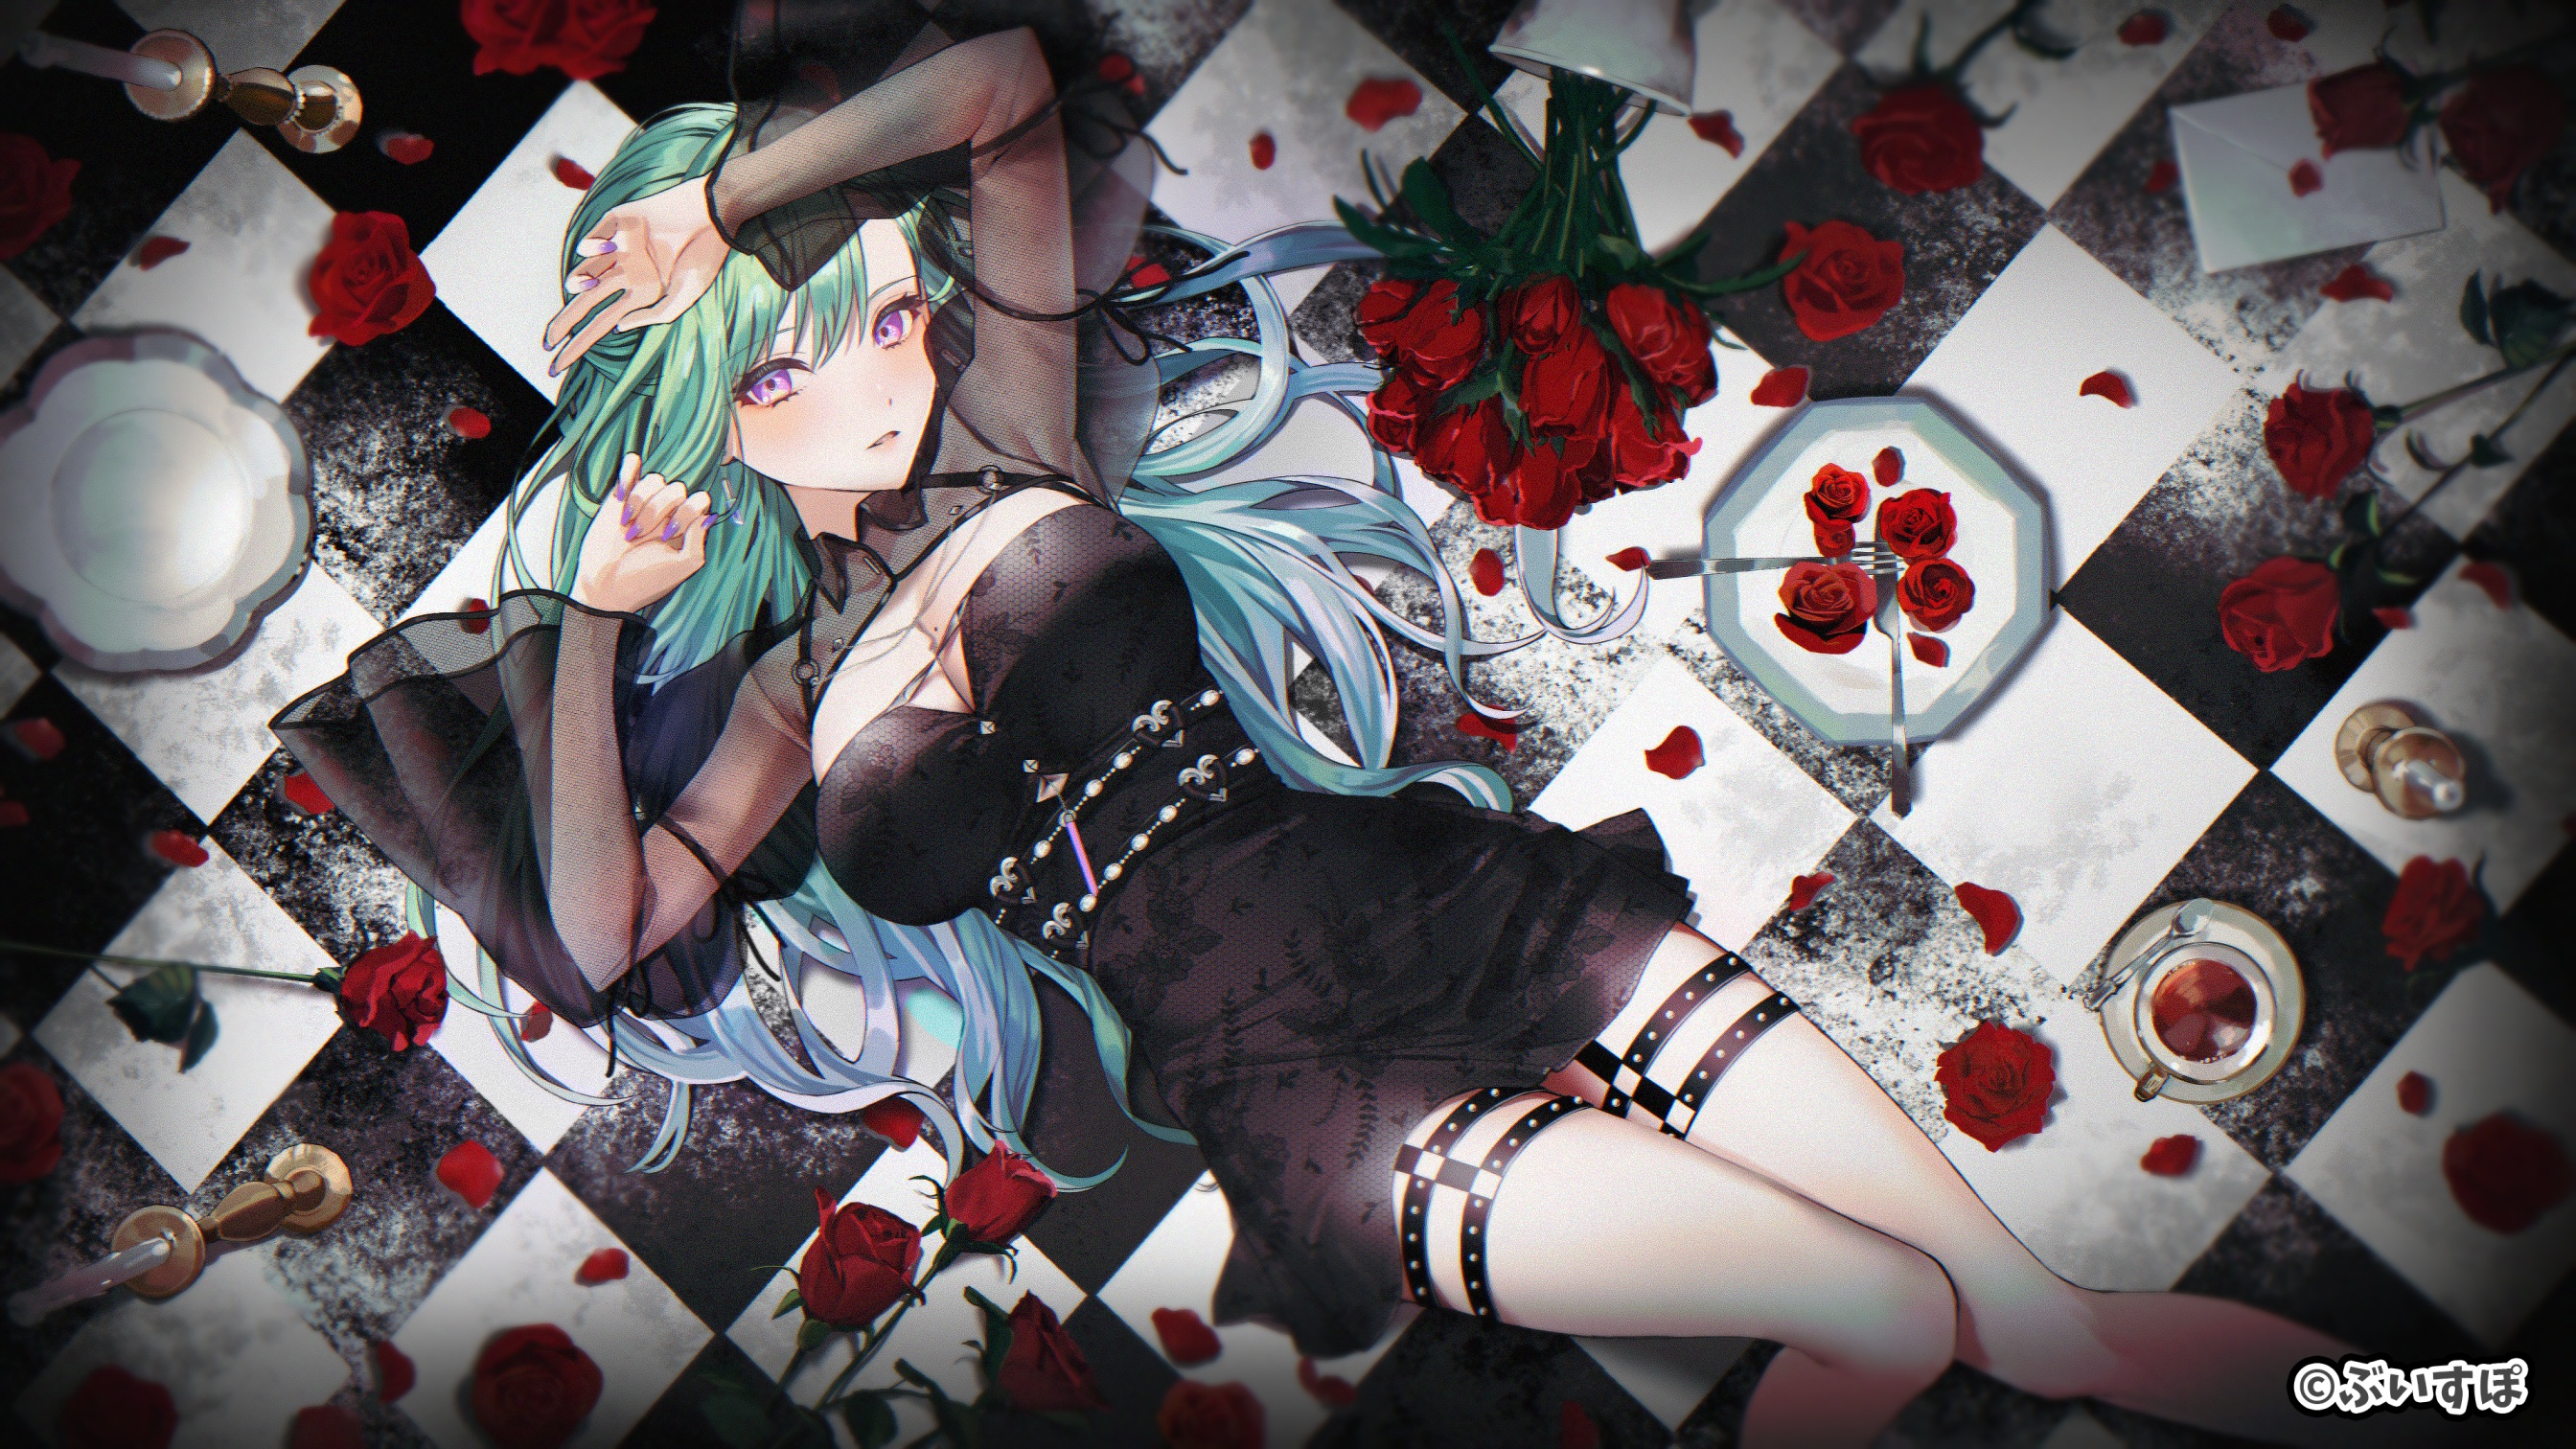 Anime 2688x1512 anime anime girls watermarked on the floor lying down lying on back rose looking at viewer checkered long hair cleavage big boobs dress arms up cup spoon fork knife plates petals drink moles mole on breast high angle red flowers